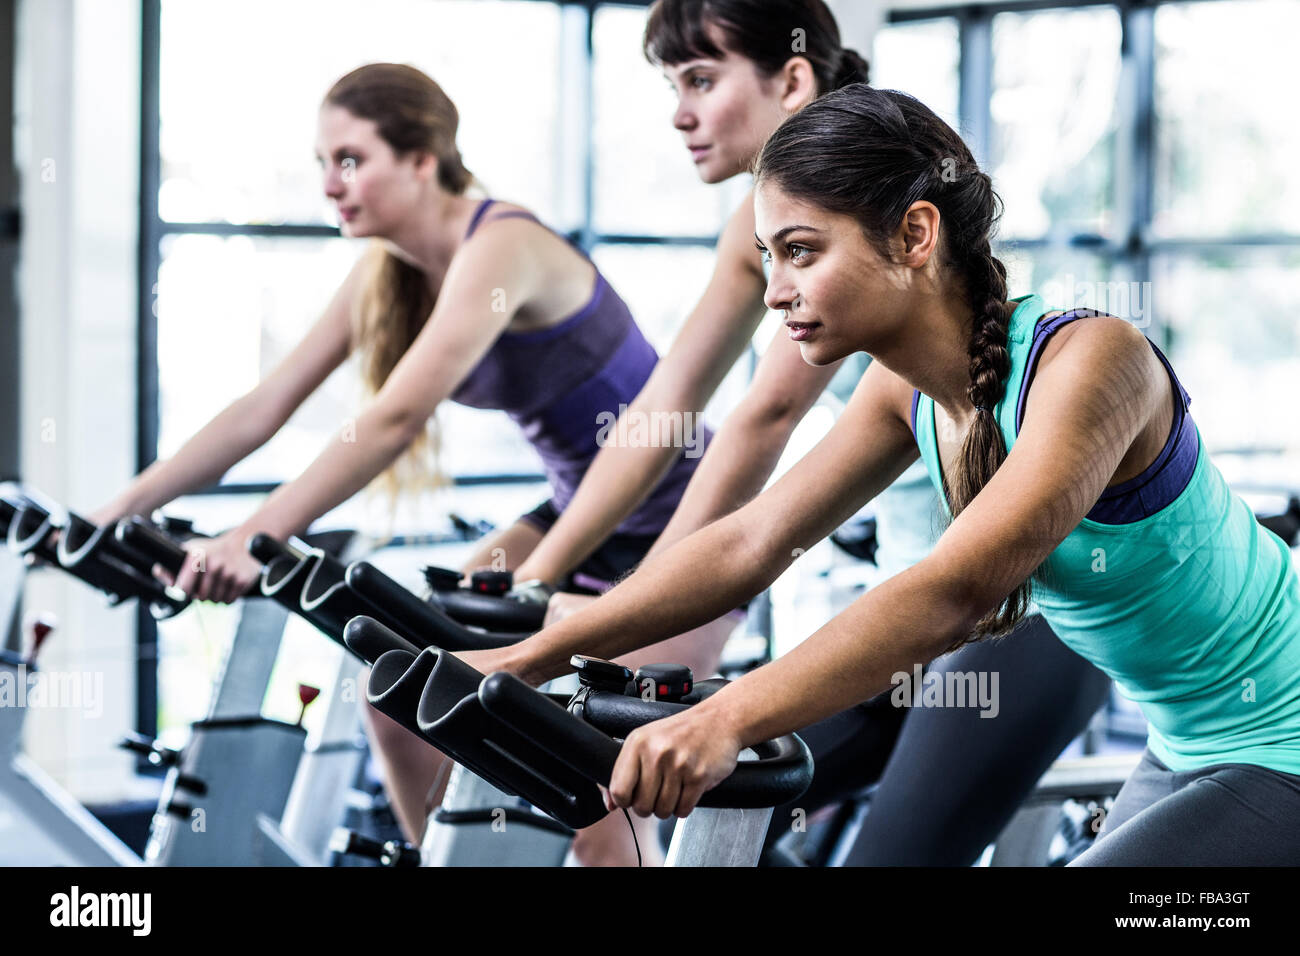 Fit woman working out at spinning class Banque D'Images